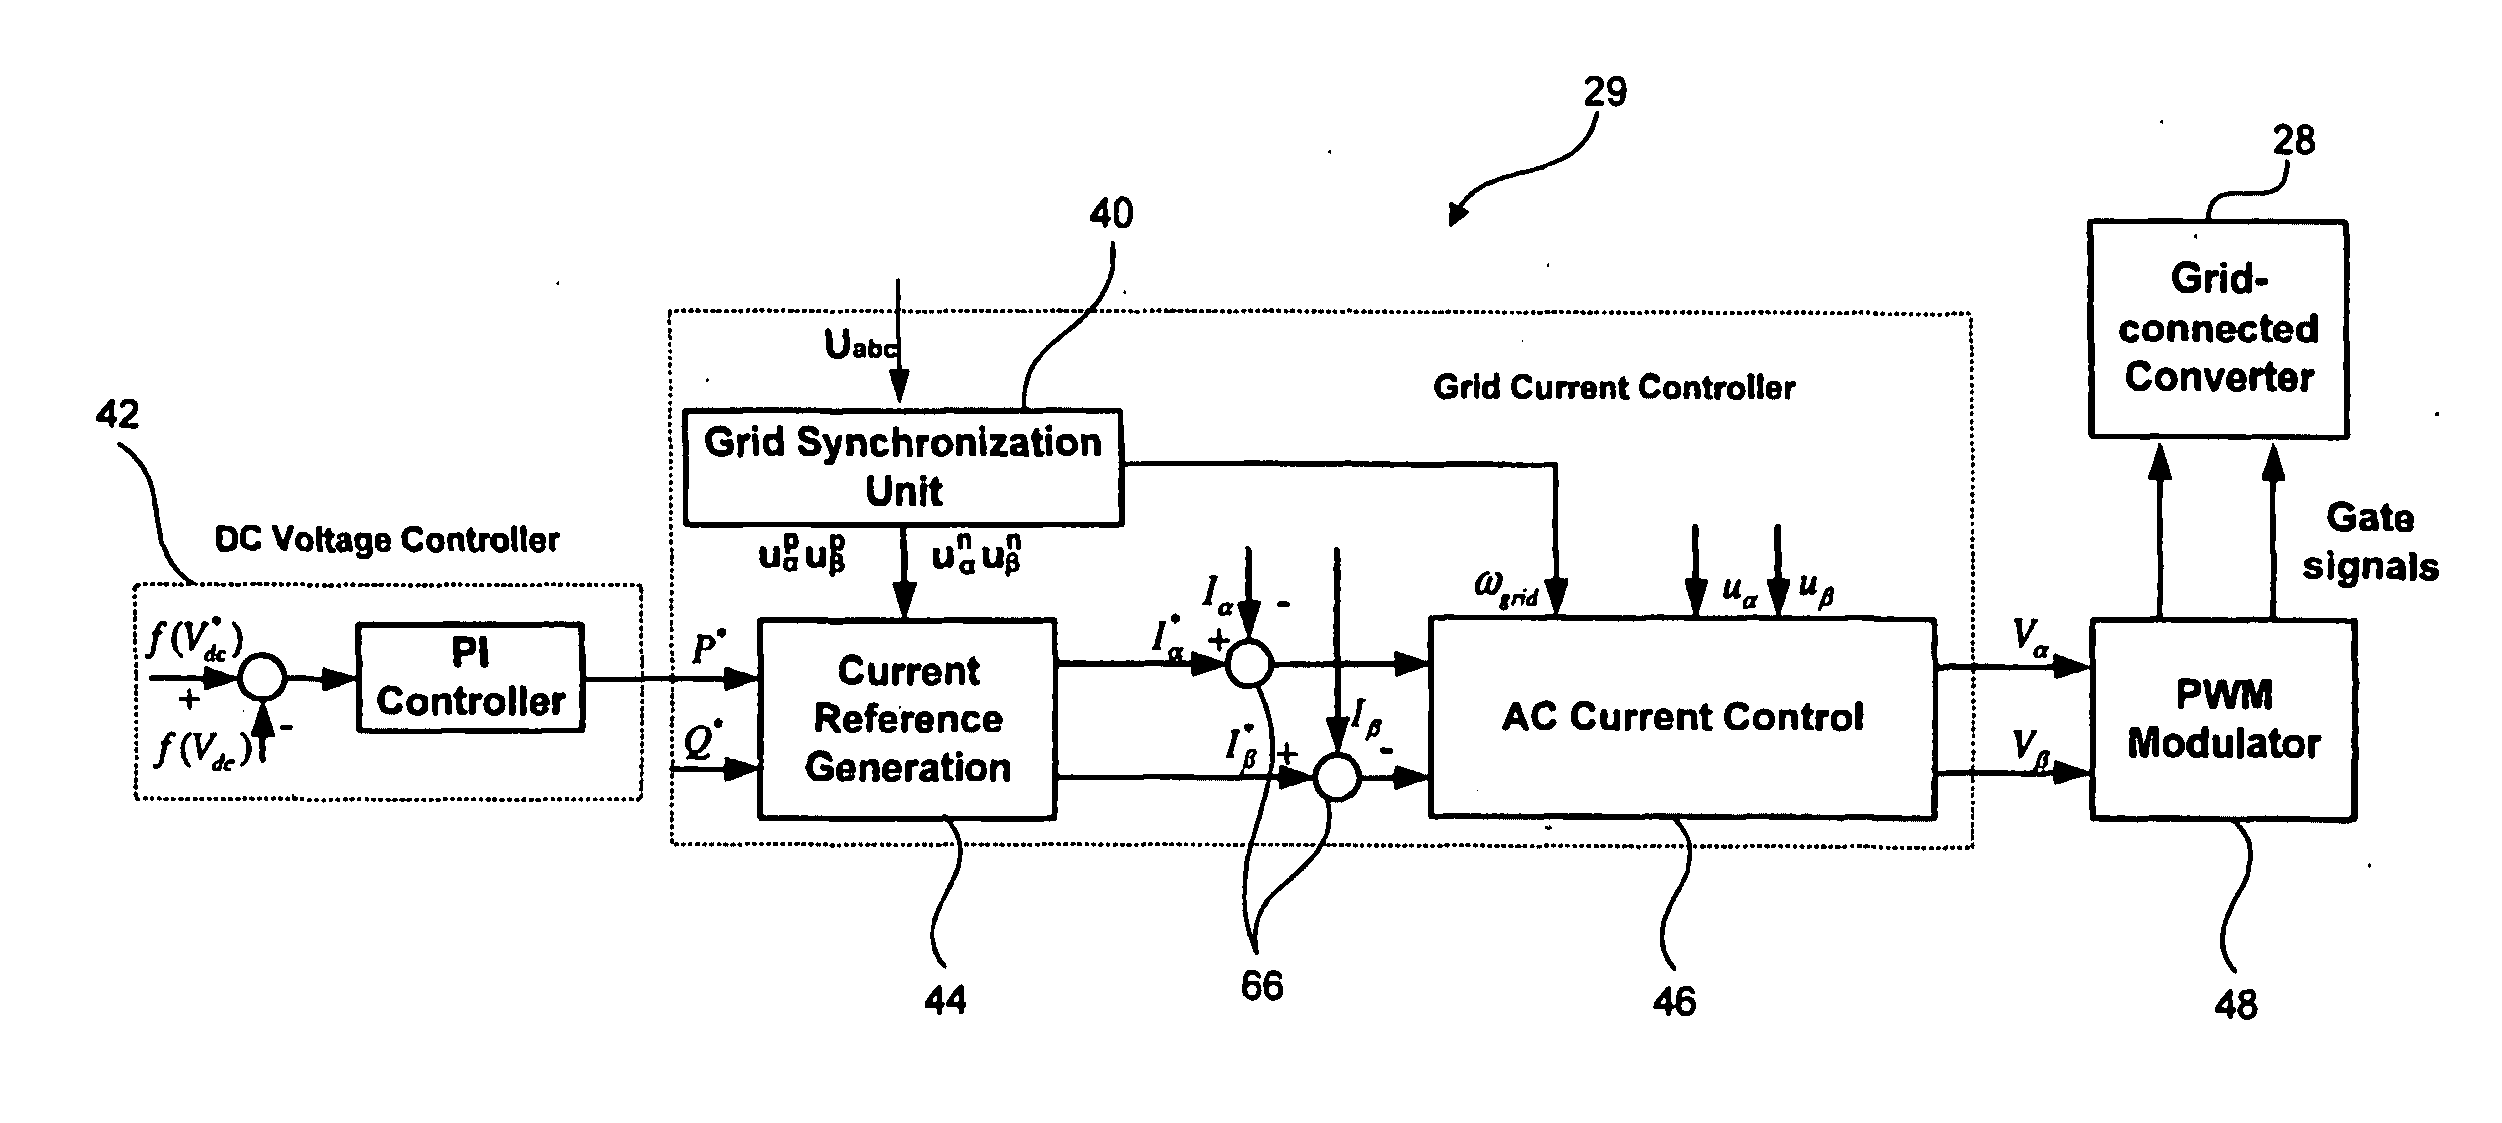 Method for controlling a power converter in a wind turbine generator